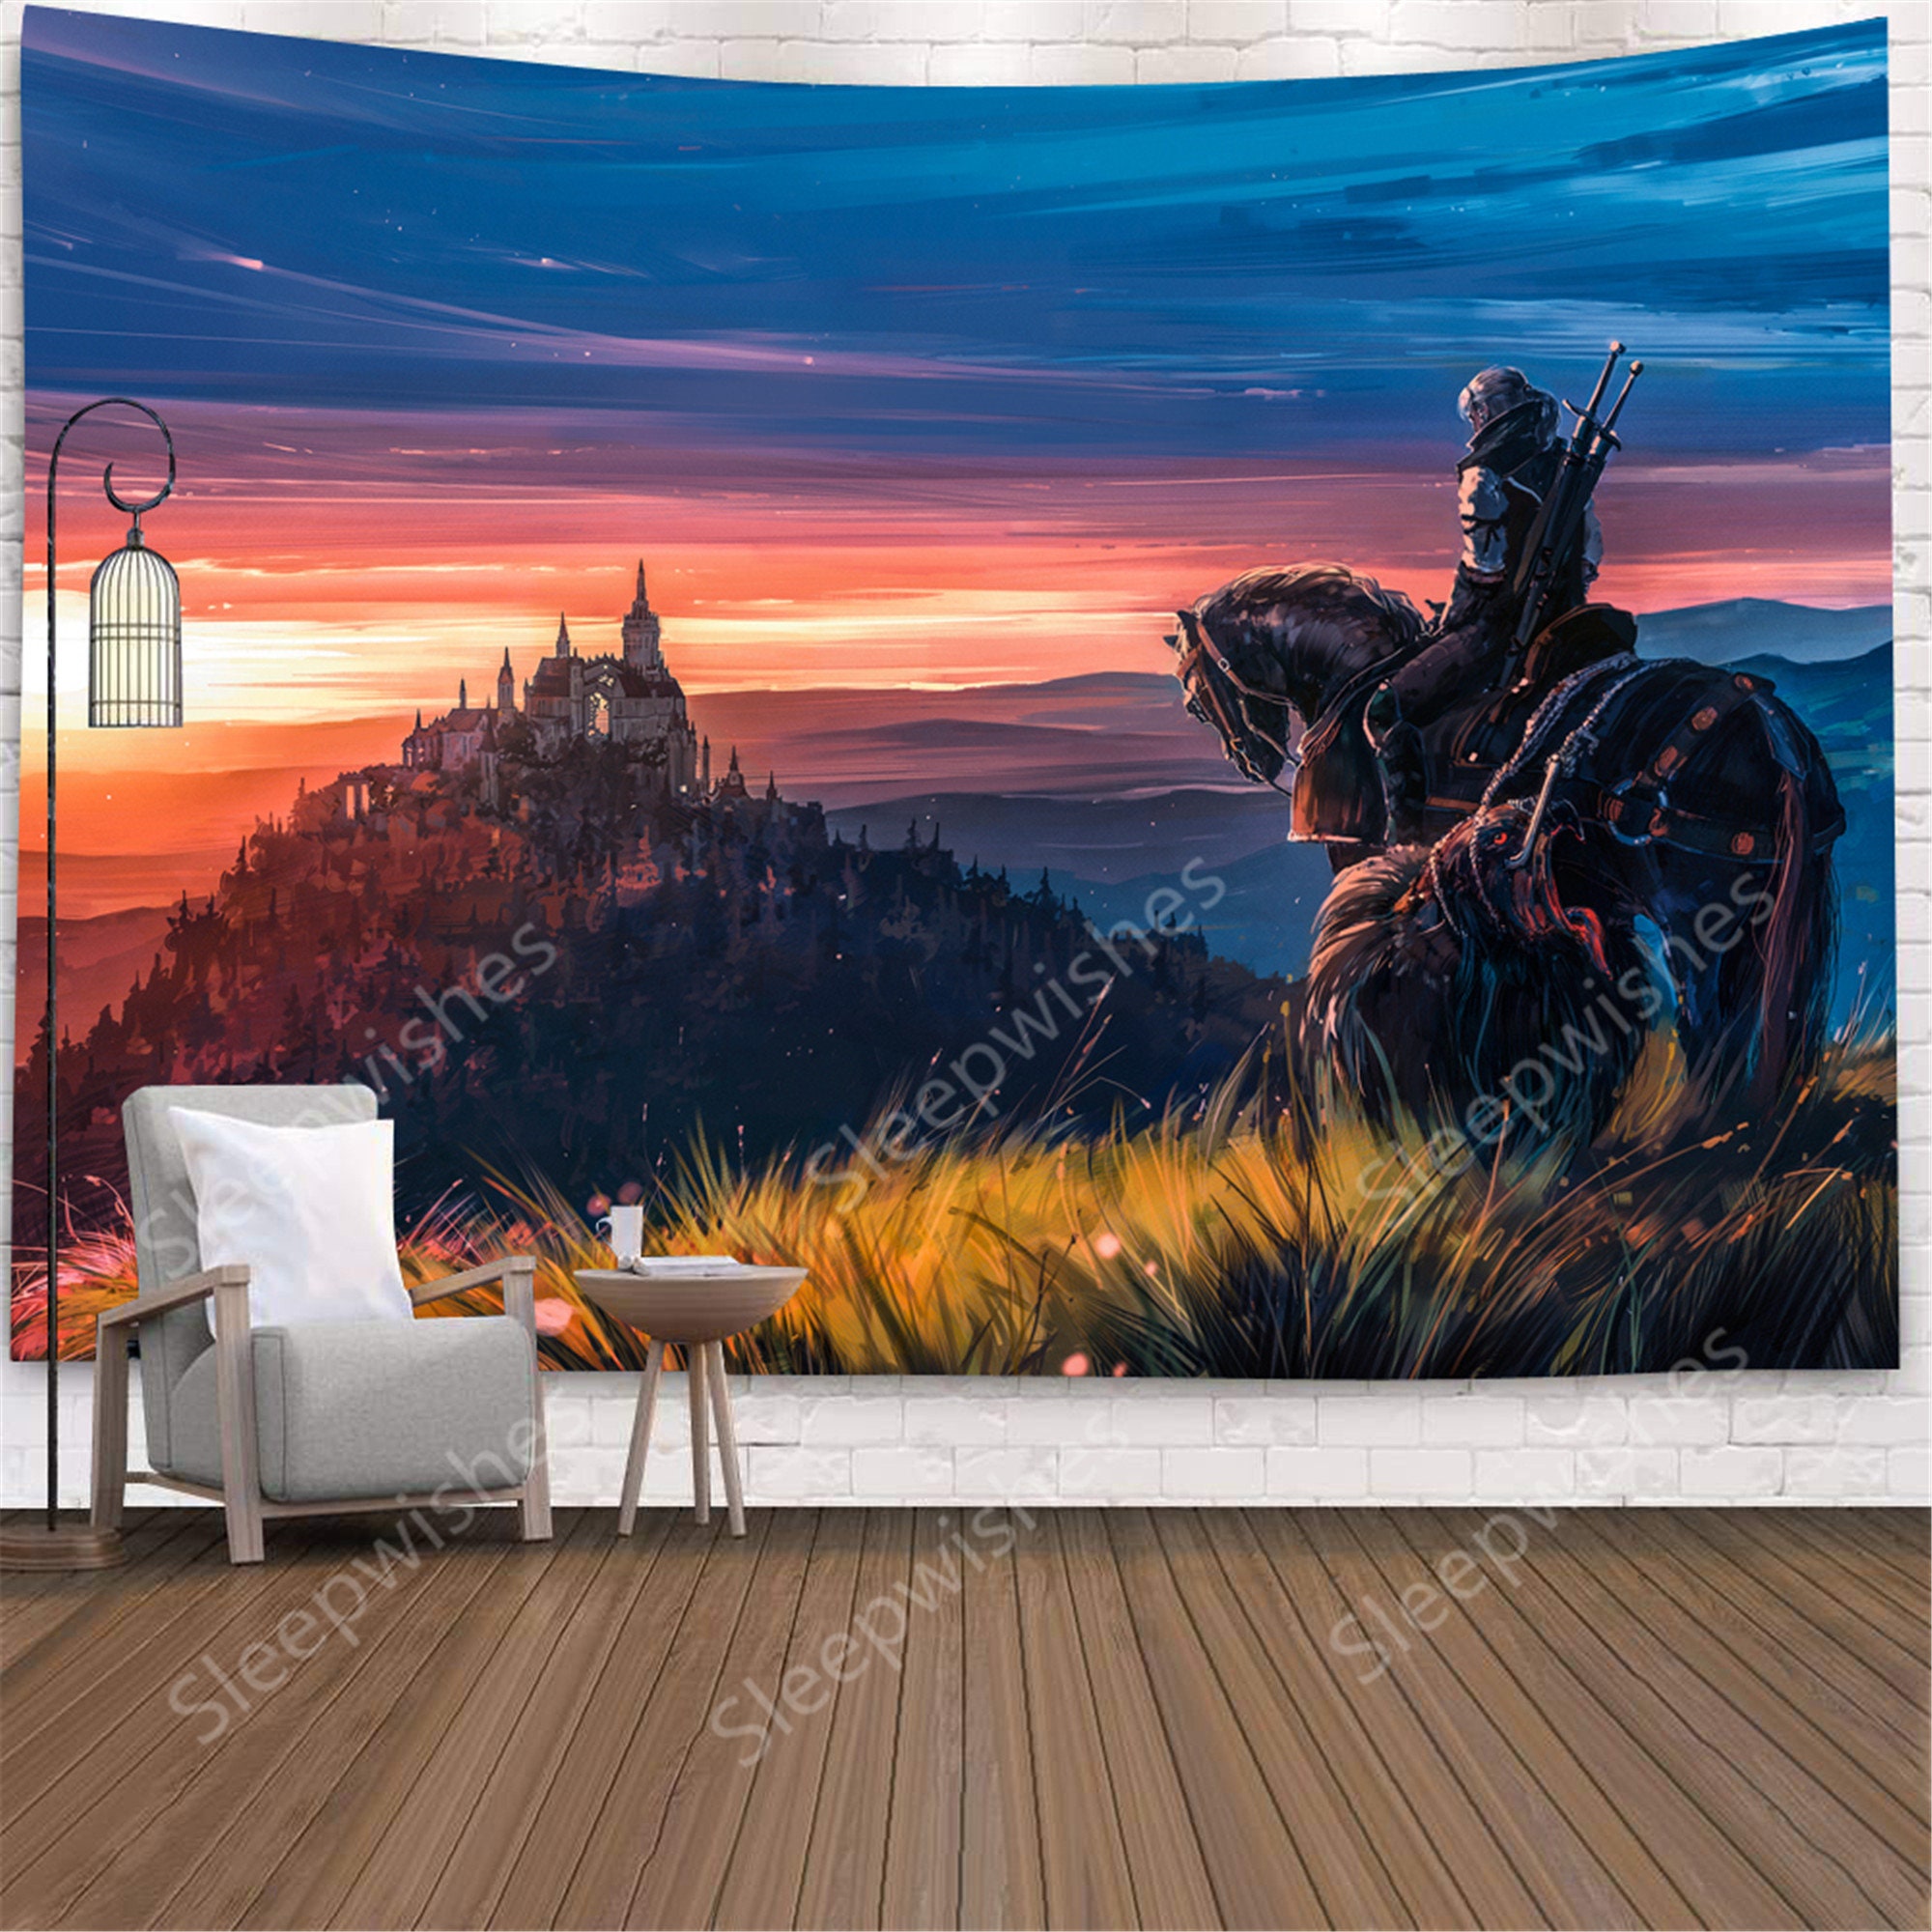 Fantasy Castle Tapestry Wall Hanging Knight Tapestry Sunset | Etsy